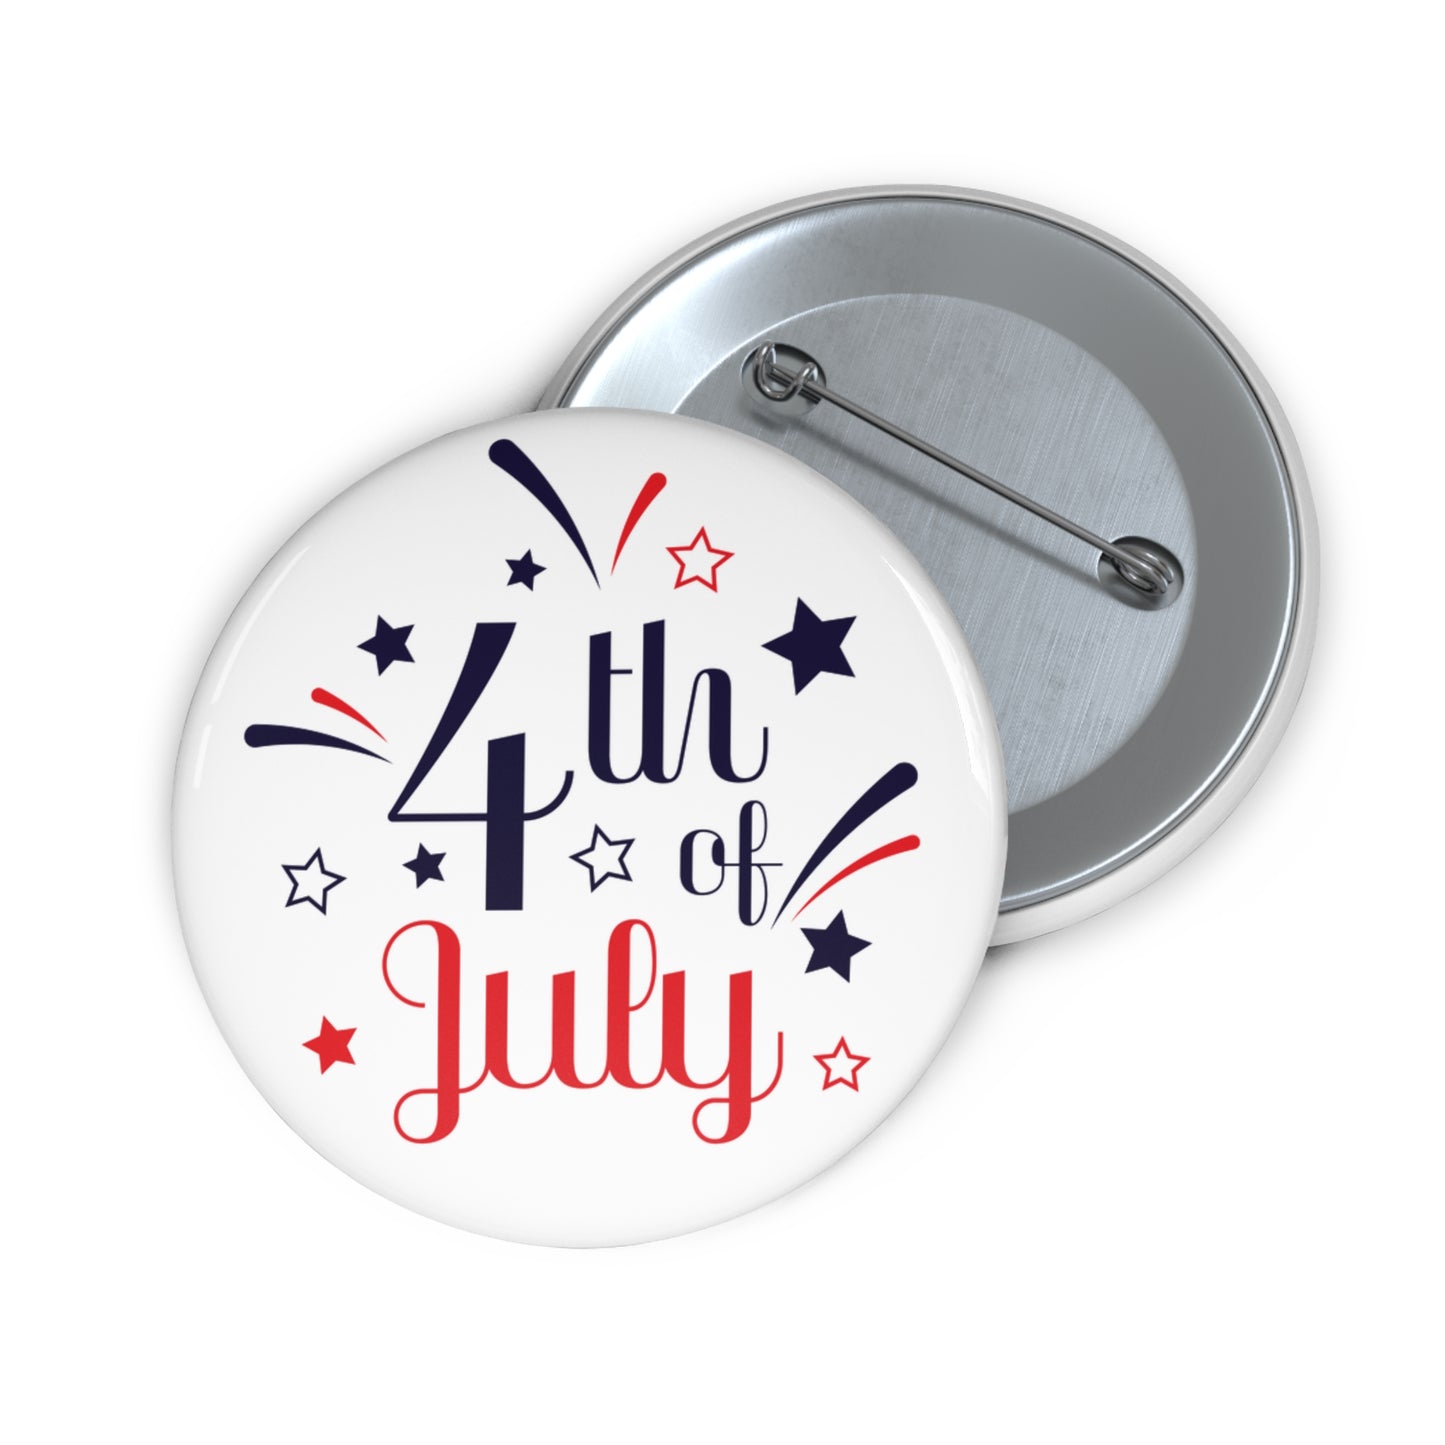 A Printify 4th of July Buttons: 2 sizes; Lightweight metal; Graphics with "4th of July" written in blue and red text, surrounded by stars and fireworks. The pin is open, showing the metal backing and safety pin backing mechanism.